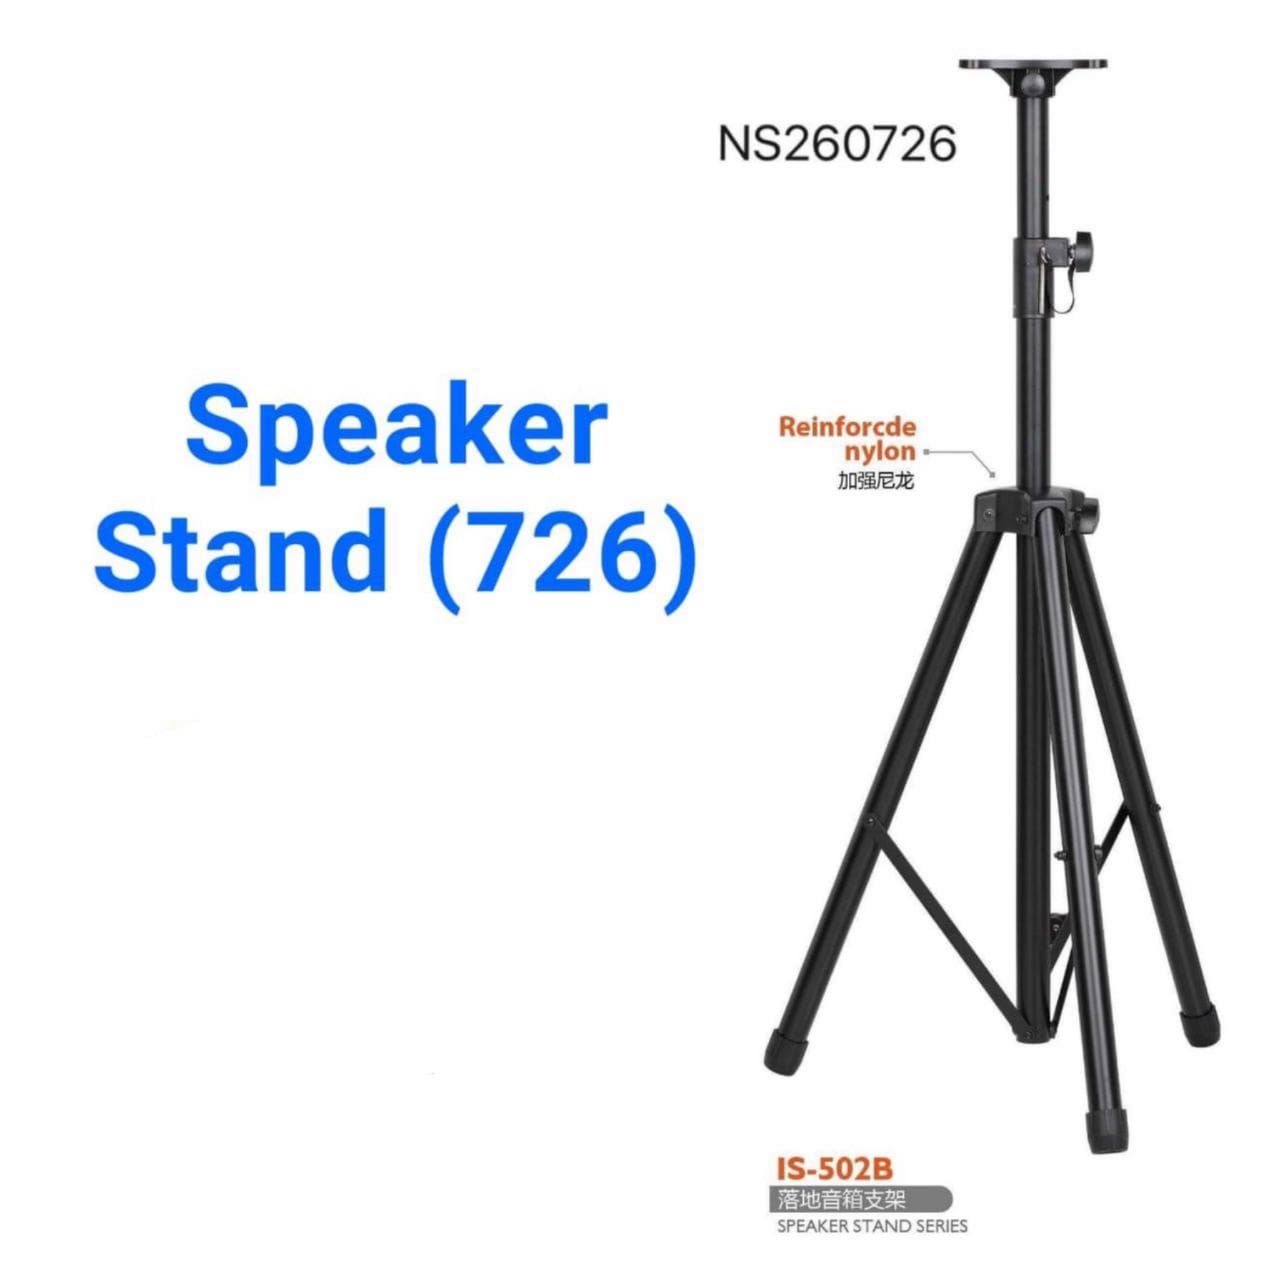 New Strong Speaker Stand For Heavy Duty 6